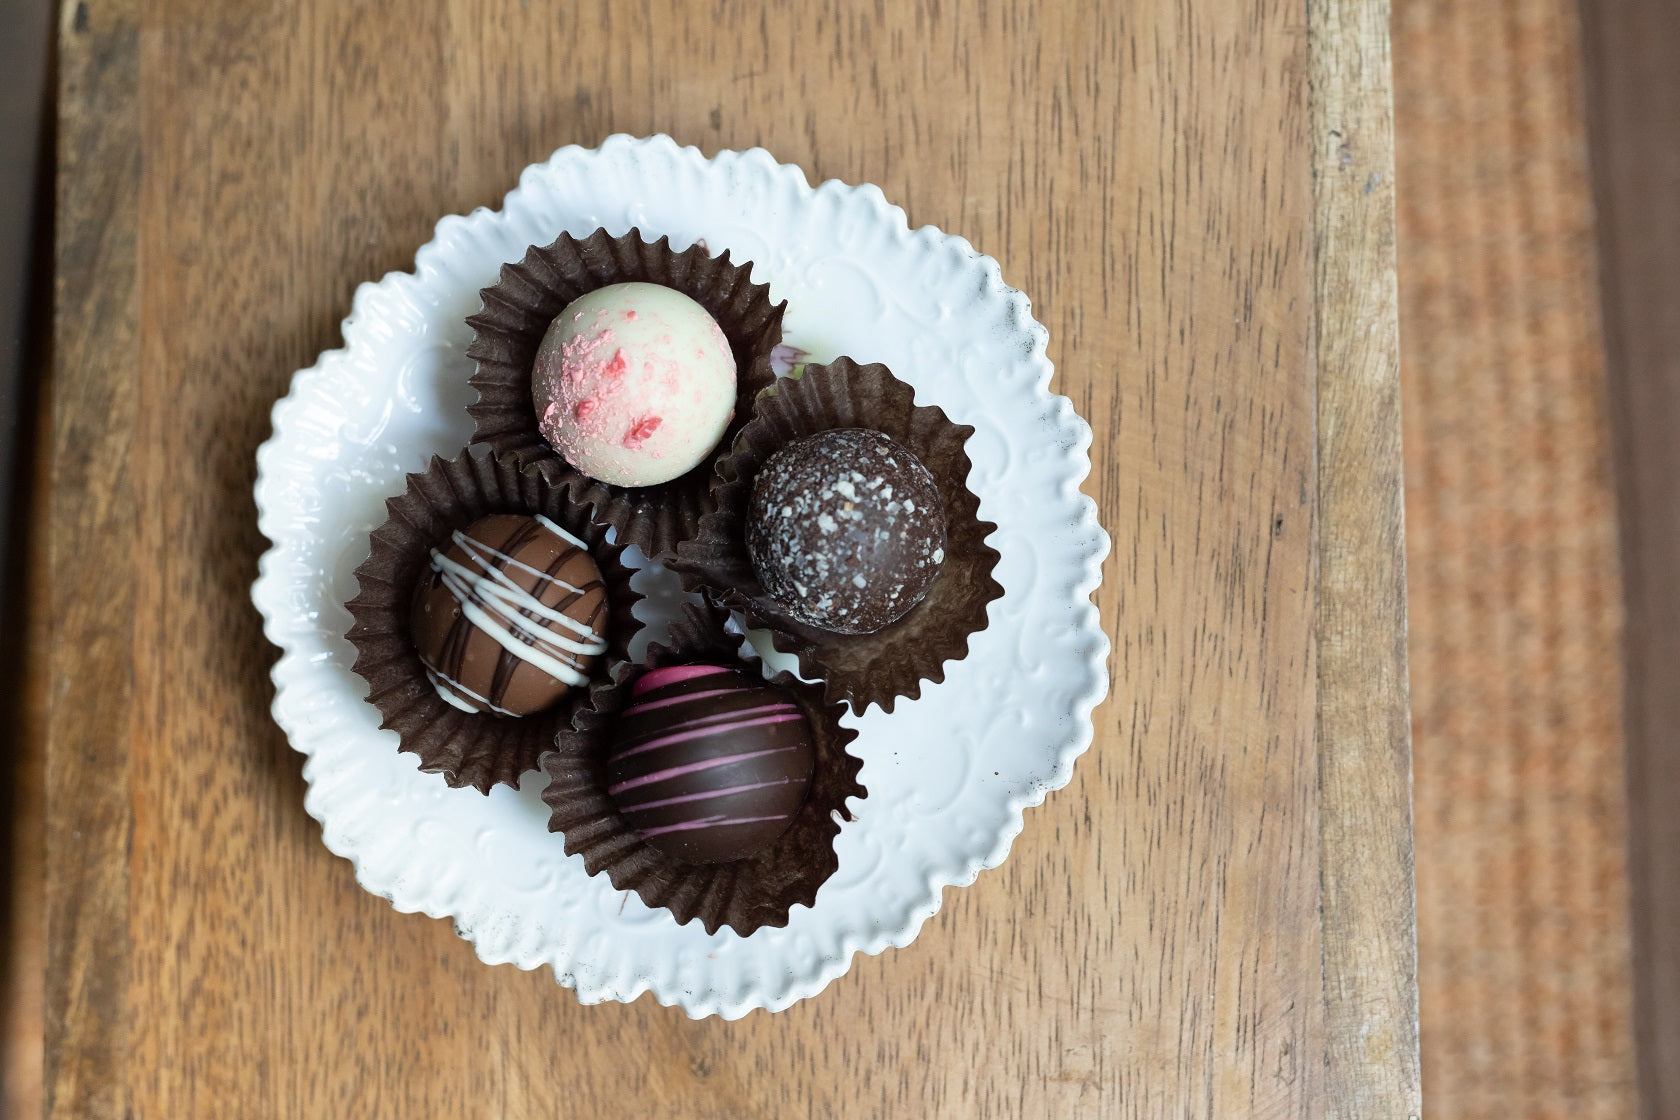 4 pieces of assorted truffles